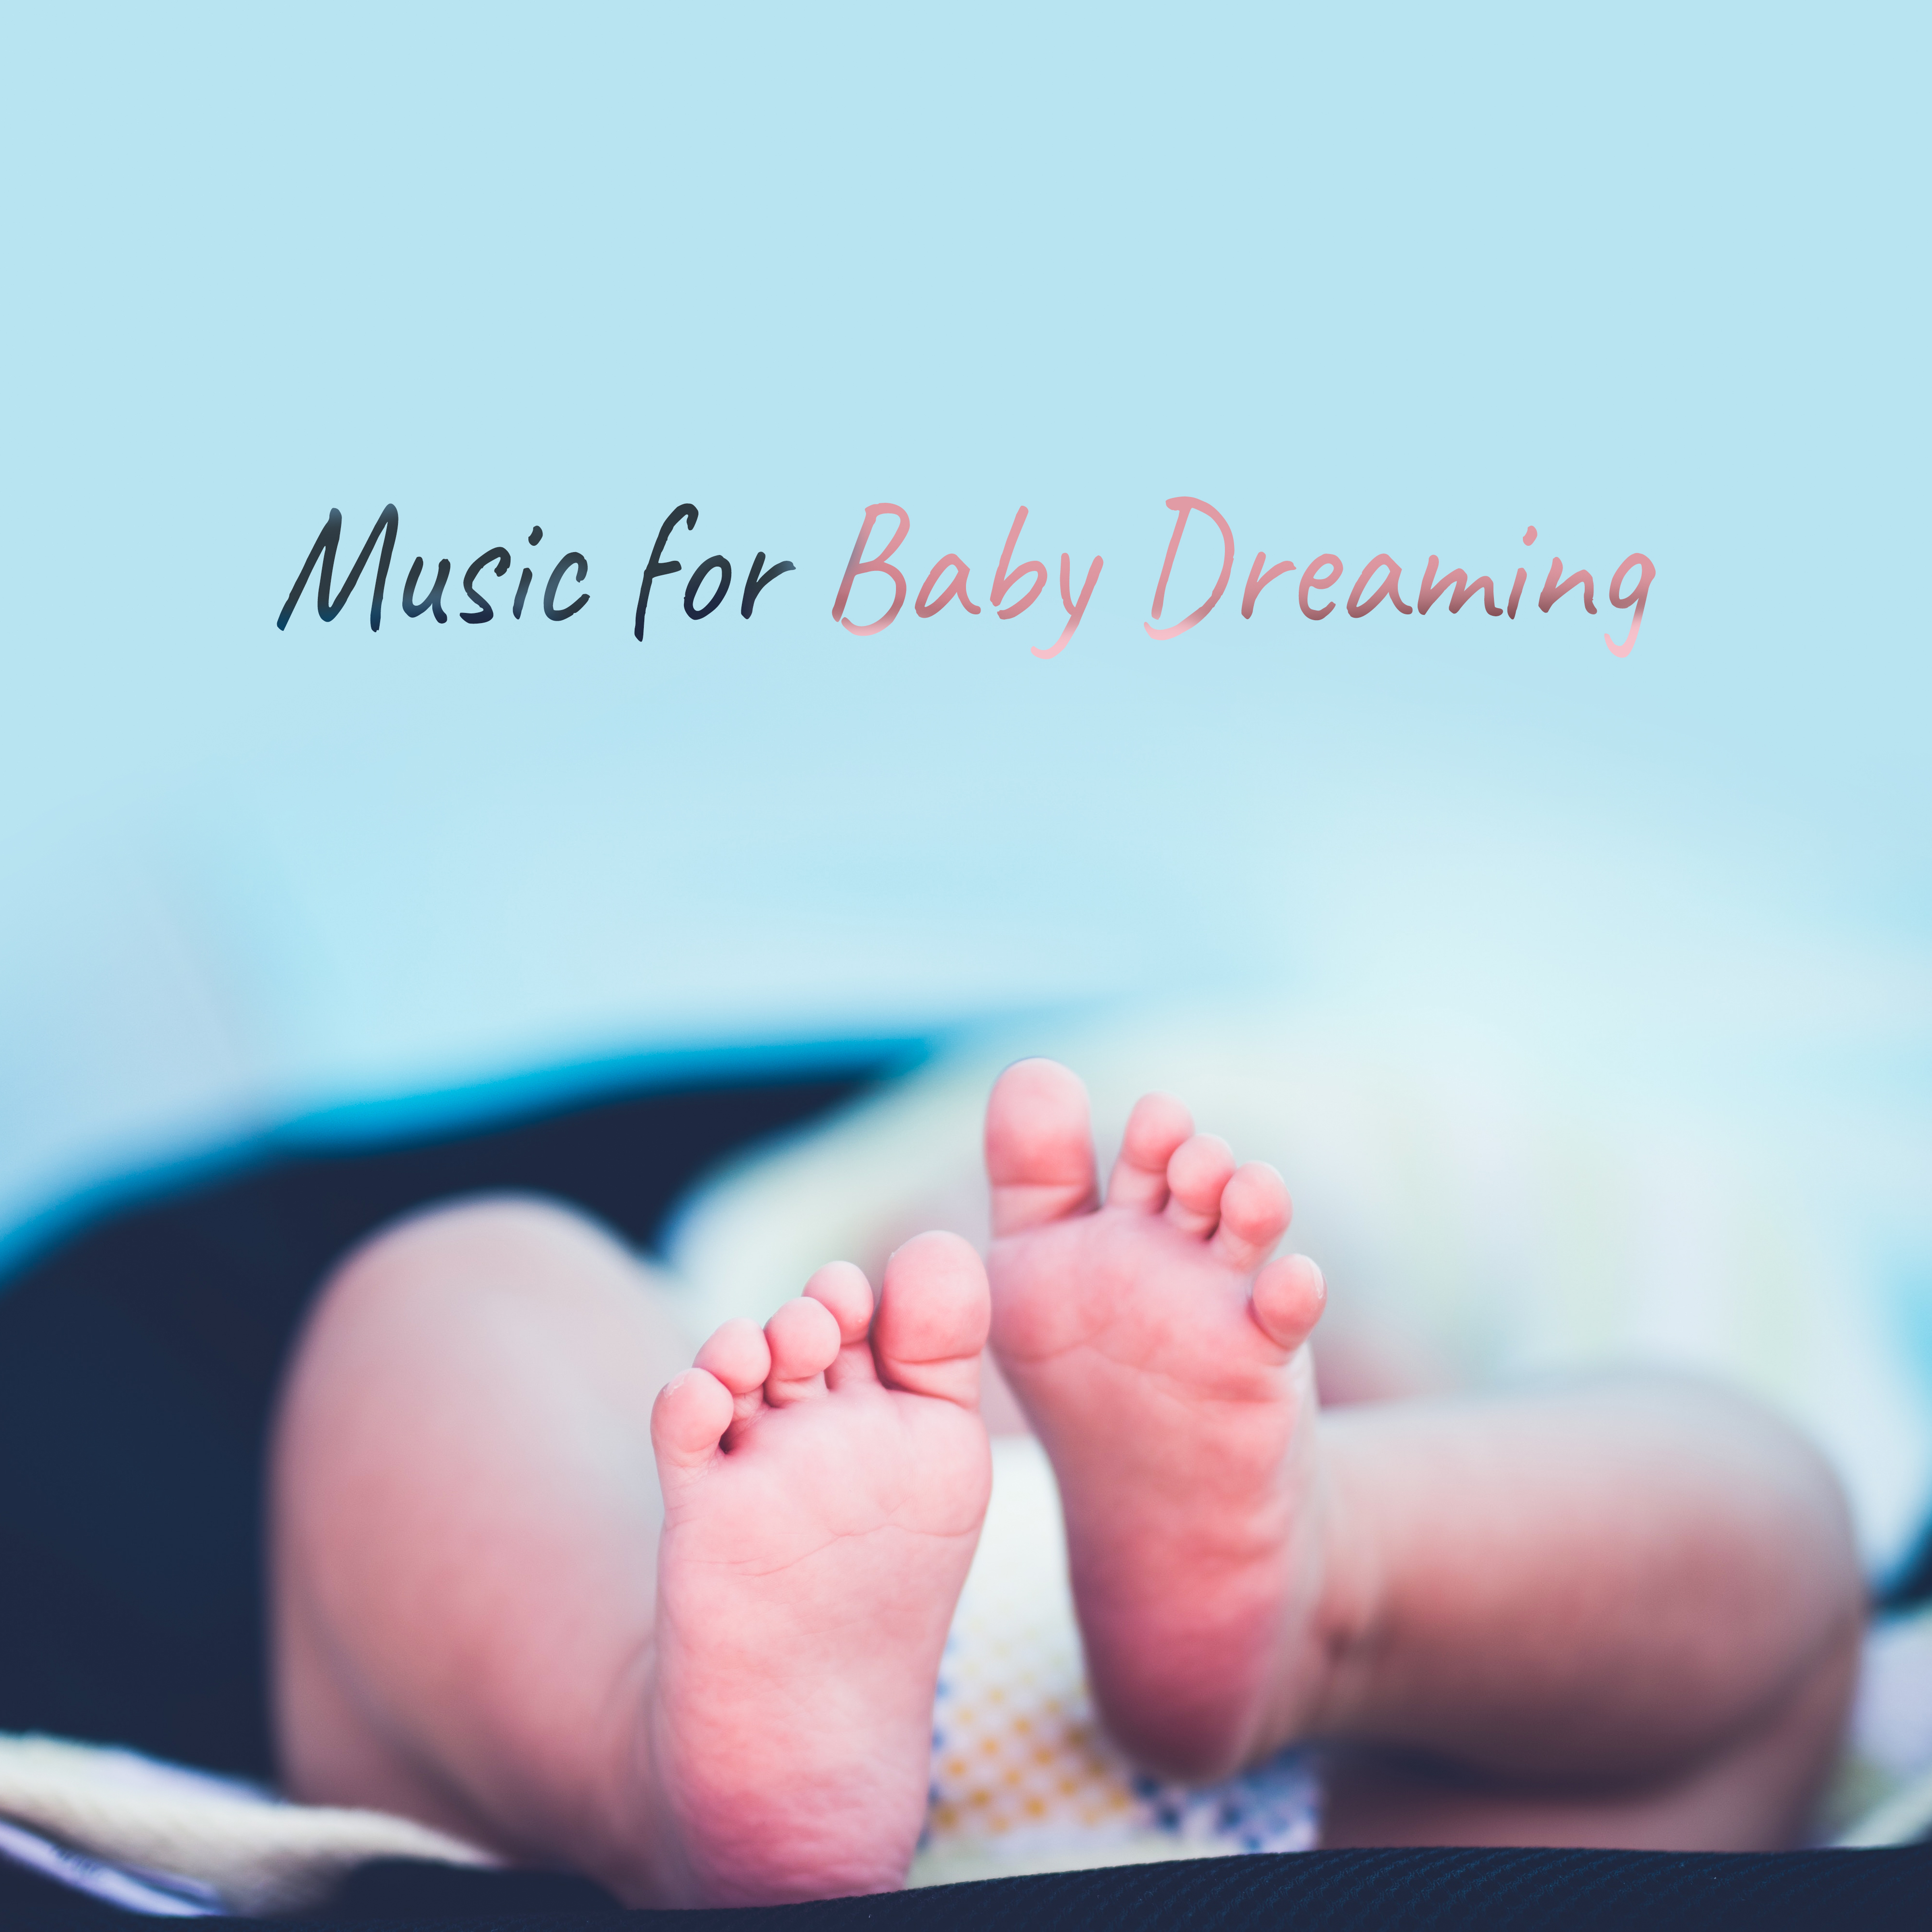 Music for Baby Dreaming – Calm Sounds to Relax Baby, Soothing Melodies, All Night Dreaming